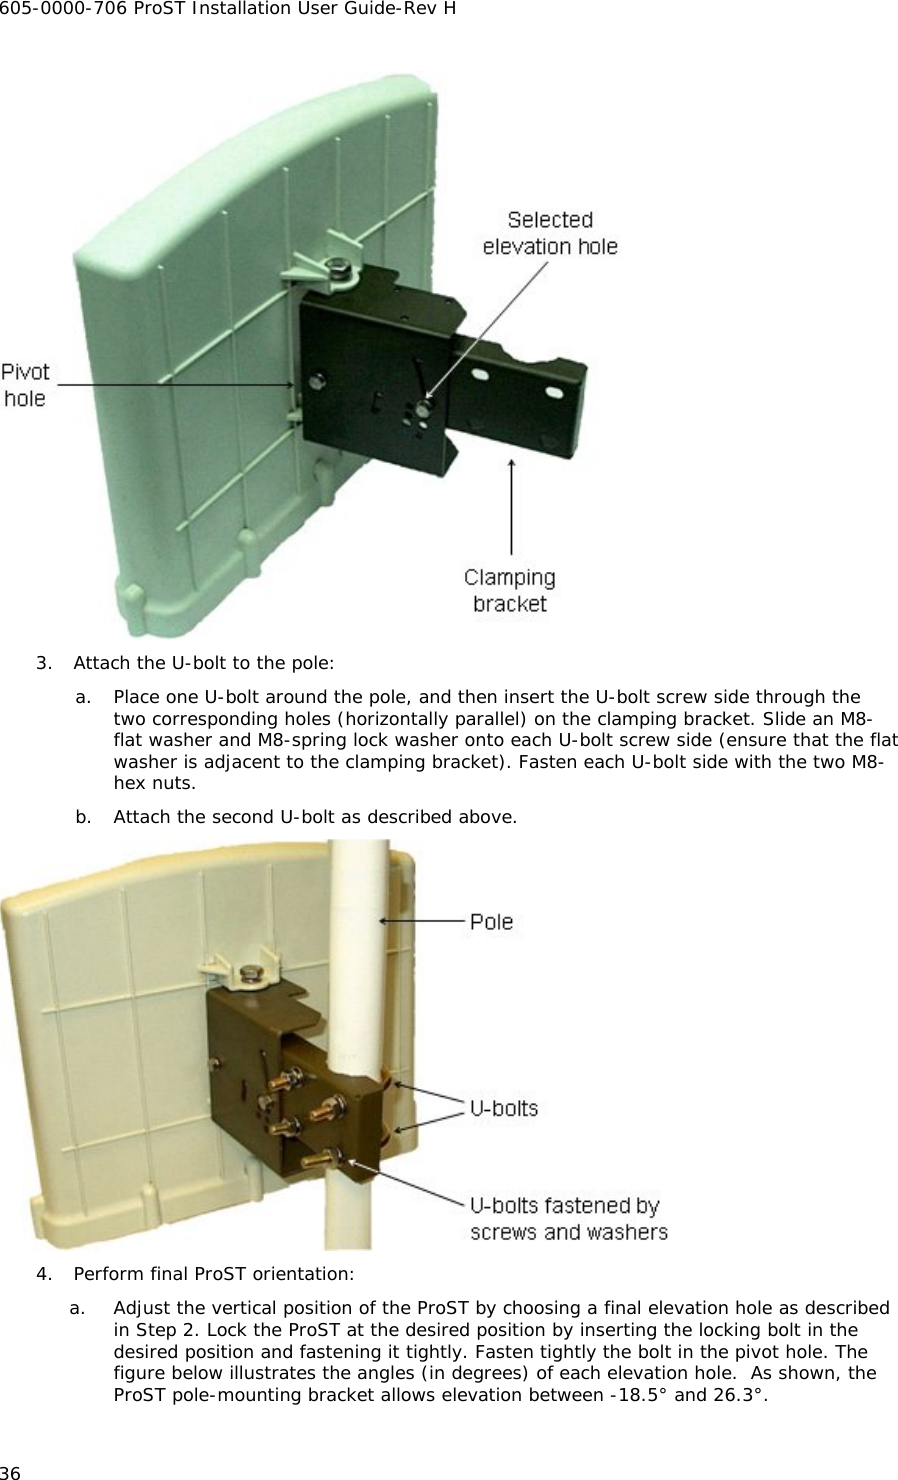 605-0000-706 ProST Installation User Guide-Rev H 36  3. Attach the U-bolt to the pole: a. Place one U-bolt around the pole, and then insert the U-bolt screw side through the two corresponding holes (horizontally parallel) on the clamping bracket. Slide an M8-flat washer and M8-spring lock washer onto each U-bolt screw side (ensure that the flat washer is adjacent to the clamping bracket). Fasten each U-bolt side with the two M8-hex nuts.  b. Attach the second U-bolt as described above.  4. Perform final ProST orientation: a. Adjust the vertical position of the ProST by choosing a final elevation hole as described in Step 2. Lock the ProST at the desired position by inserting the locking bolt in the desired position and fastening it tightly. Fasten tightly the bolt in the pivot hole. The figure below illustrates the angles (in degrees) of each elevation hole.  As shown, the ProST pole-mounting bracket allows elevation between -18.5° and 26.3°. 